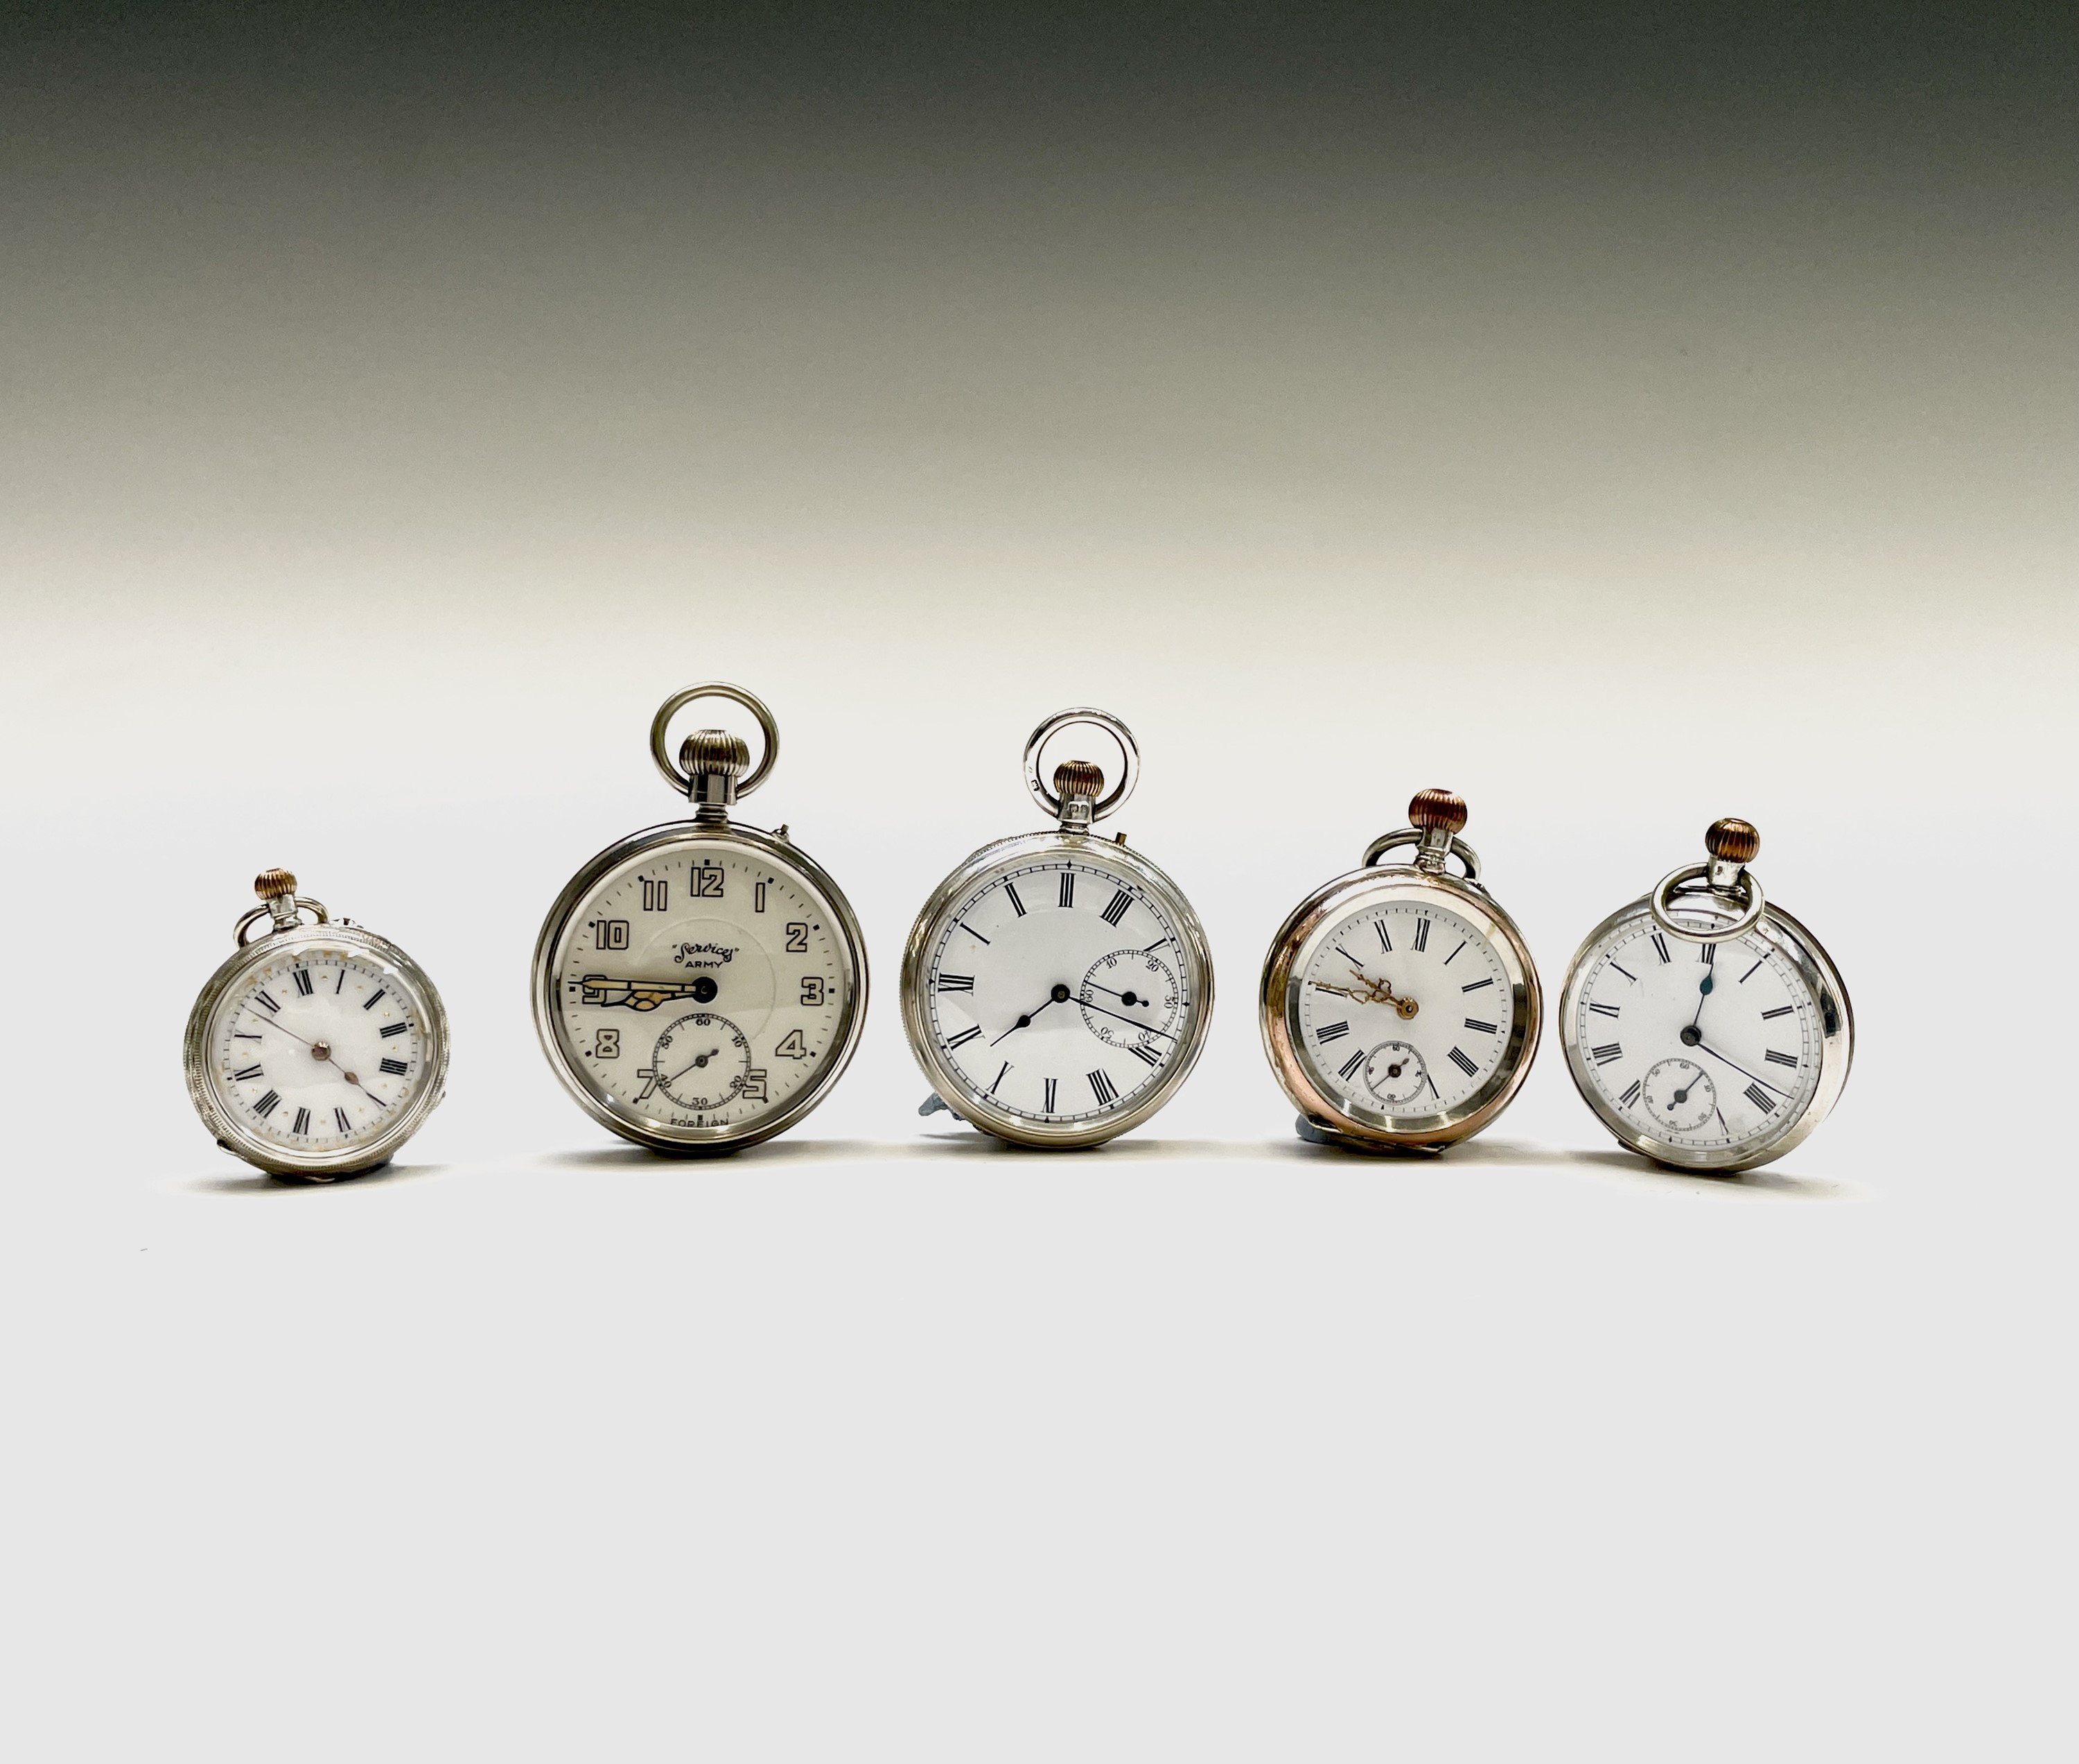 Five keyless watches. Phillip Wadsworth. Died 2020 Originally from Nottinghamshire, Wadsworth